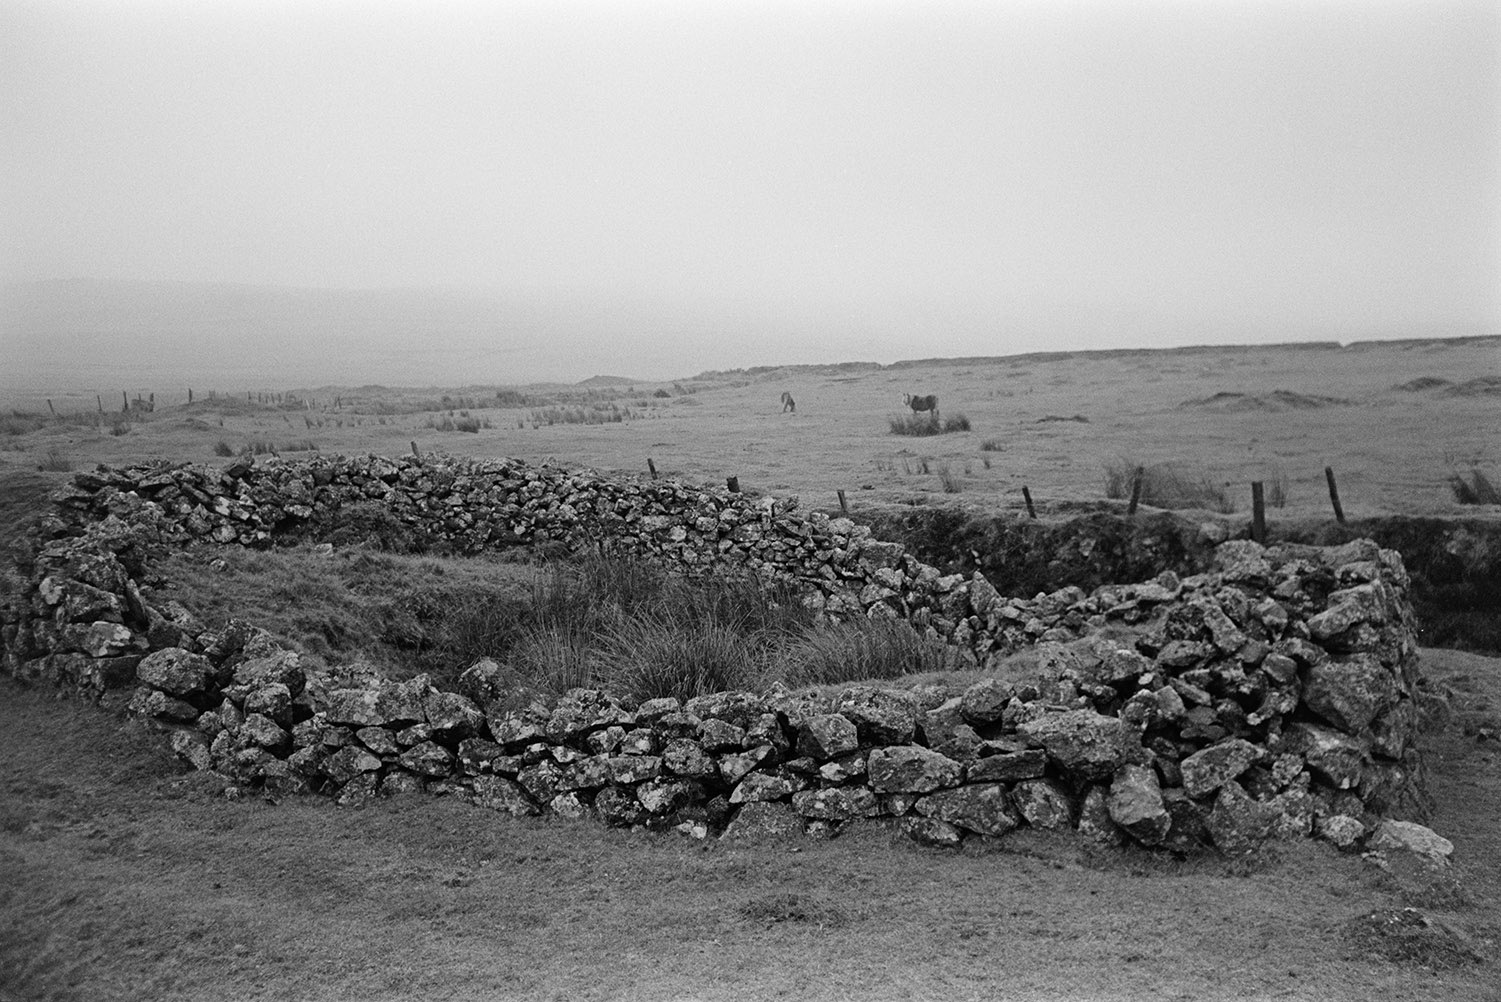 A moorland landscape with the ruins of a stone building in the foreground.